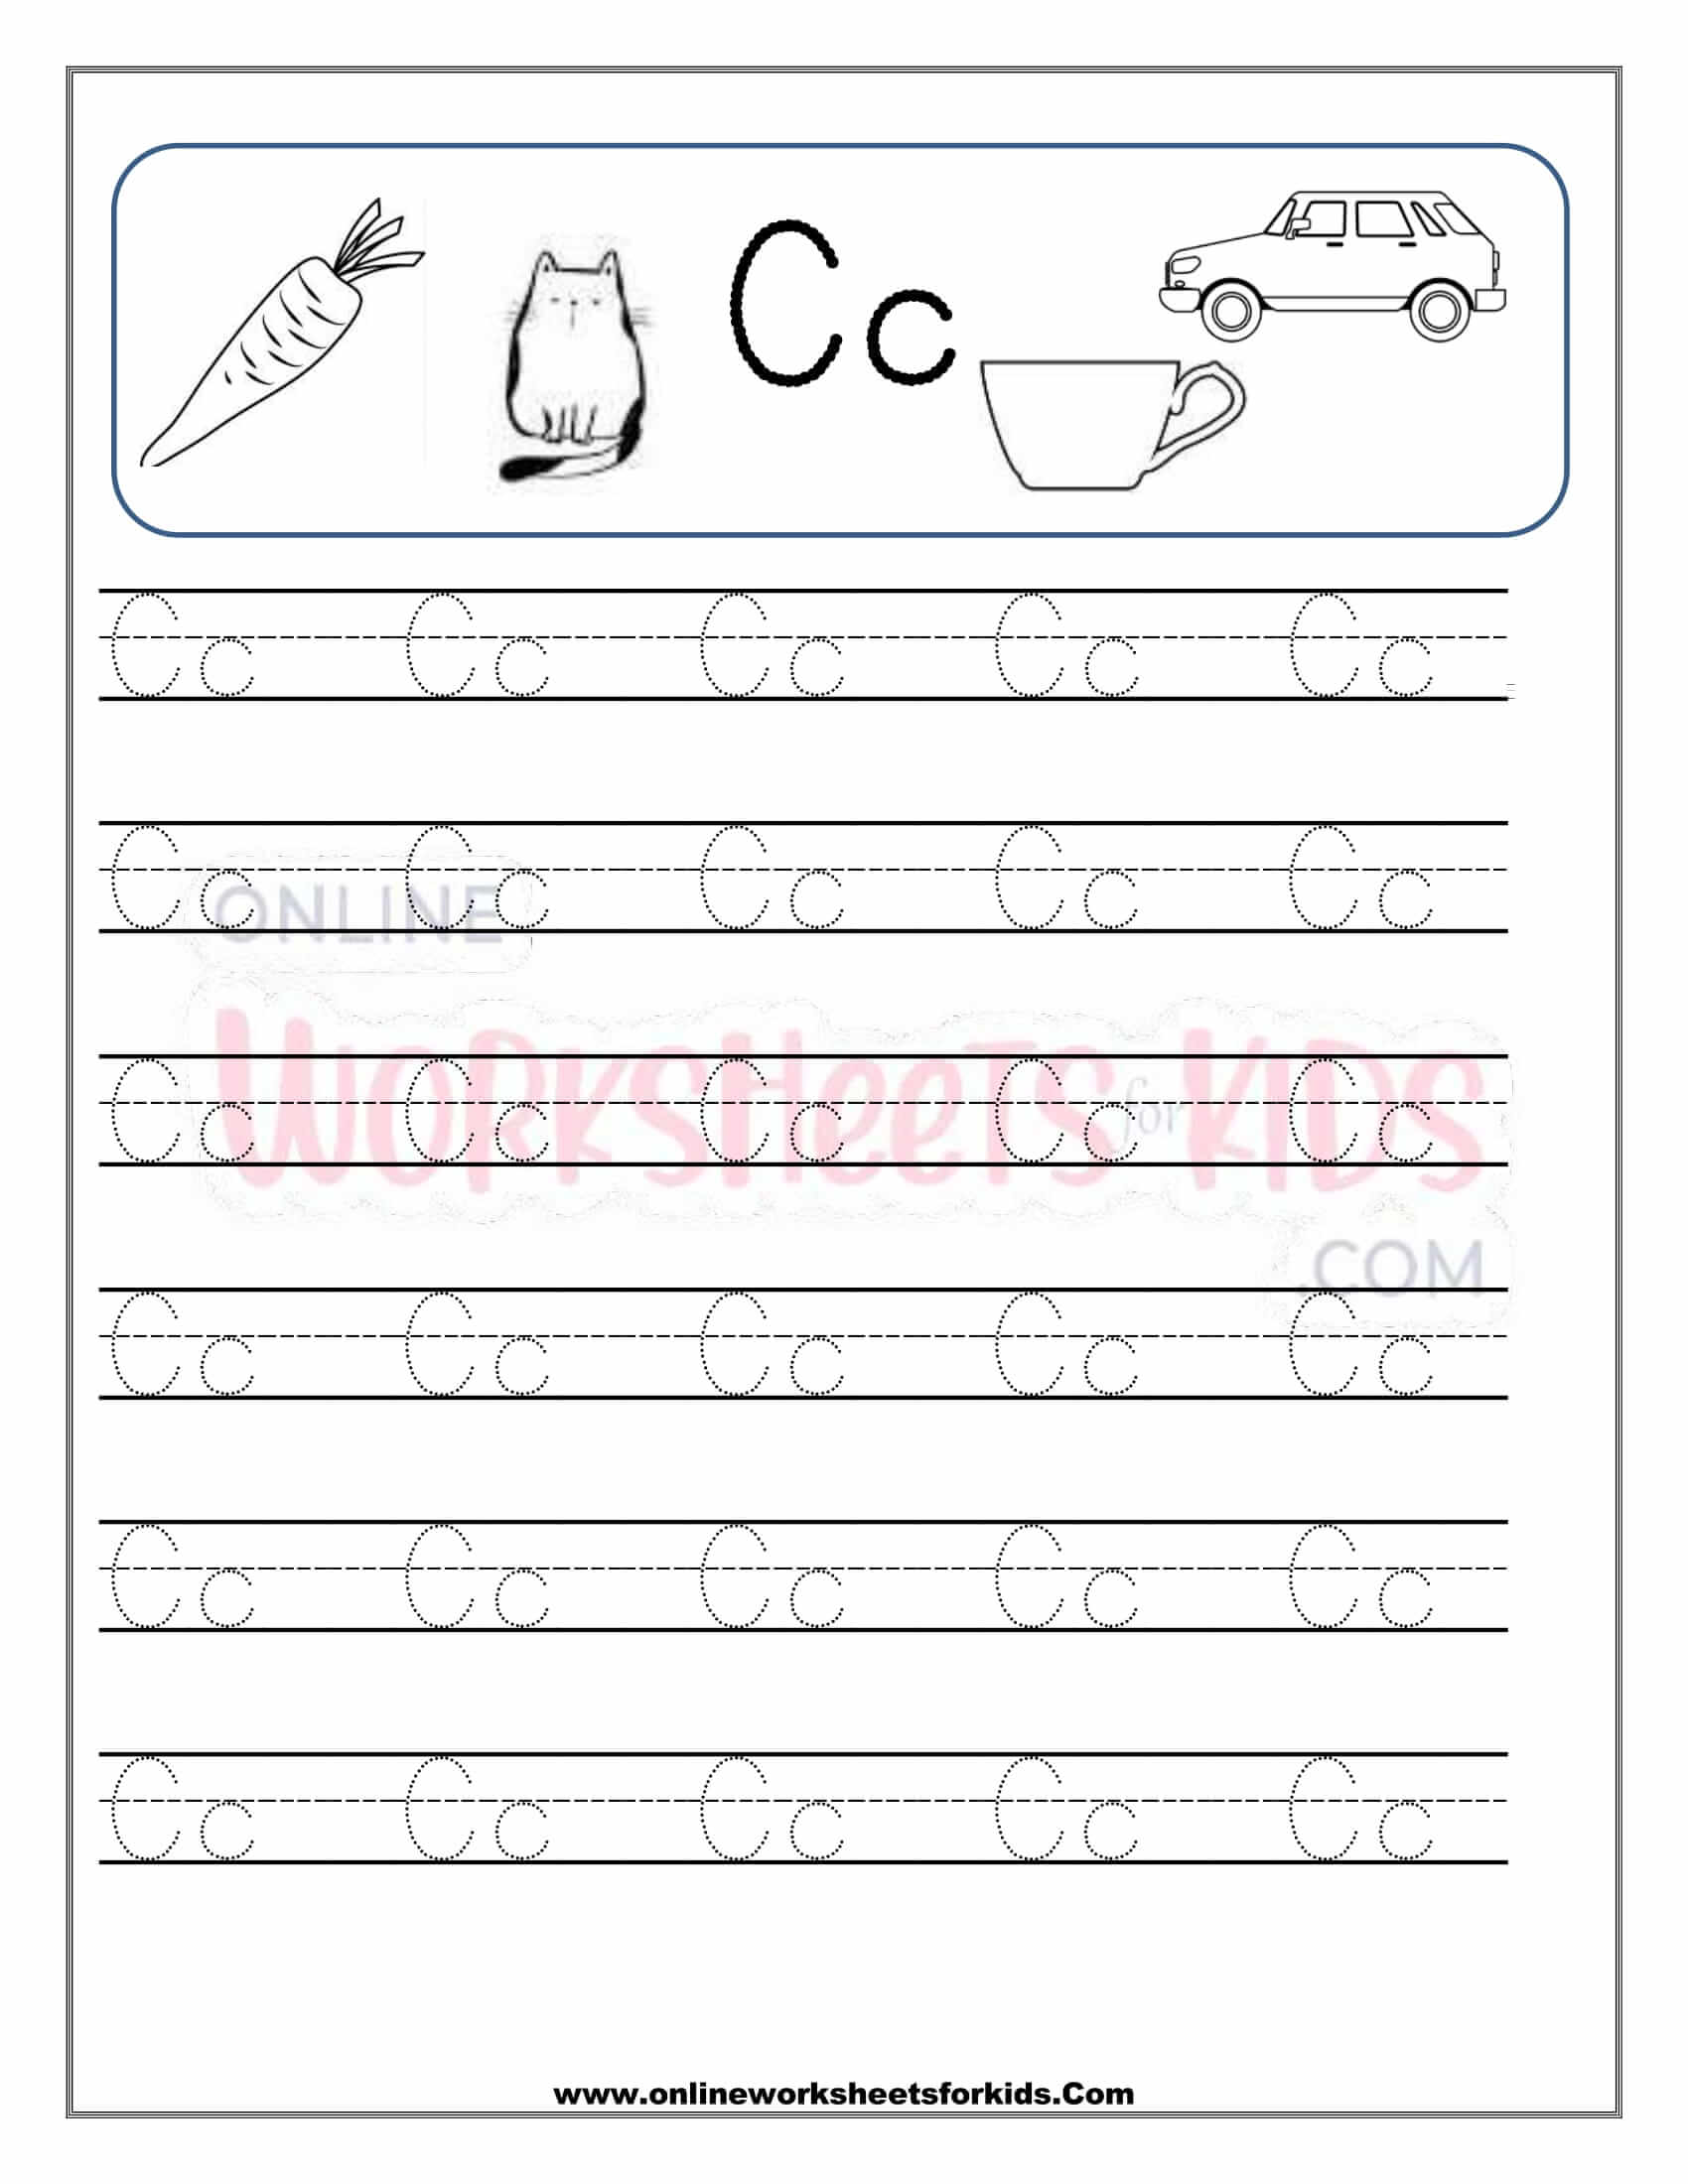 Capital And Small Letter Tracing Worksheet 3